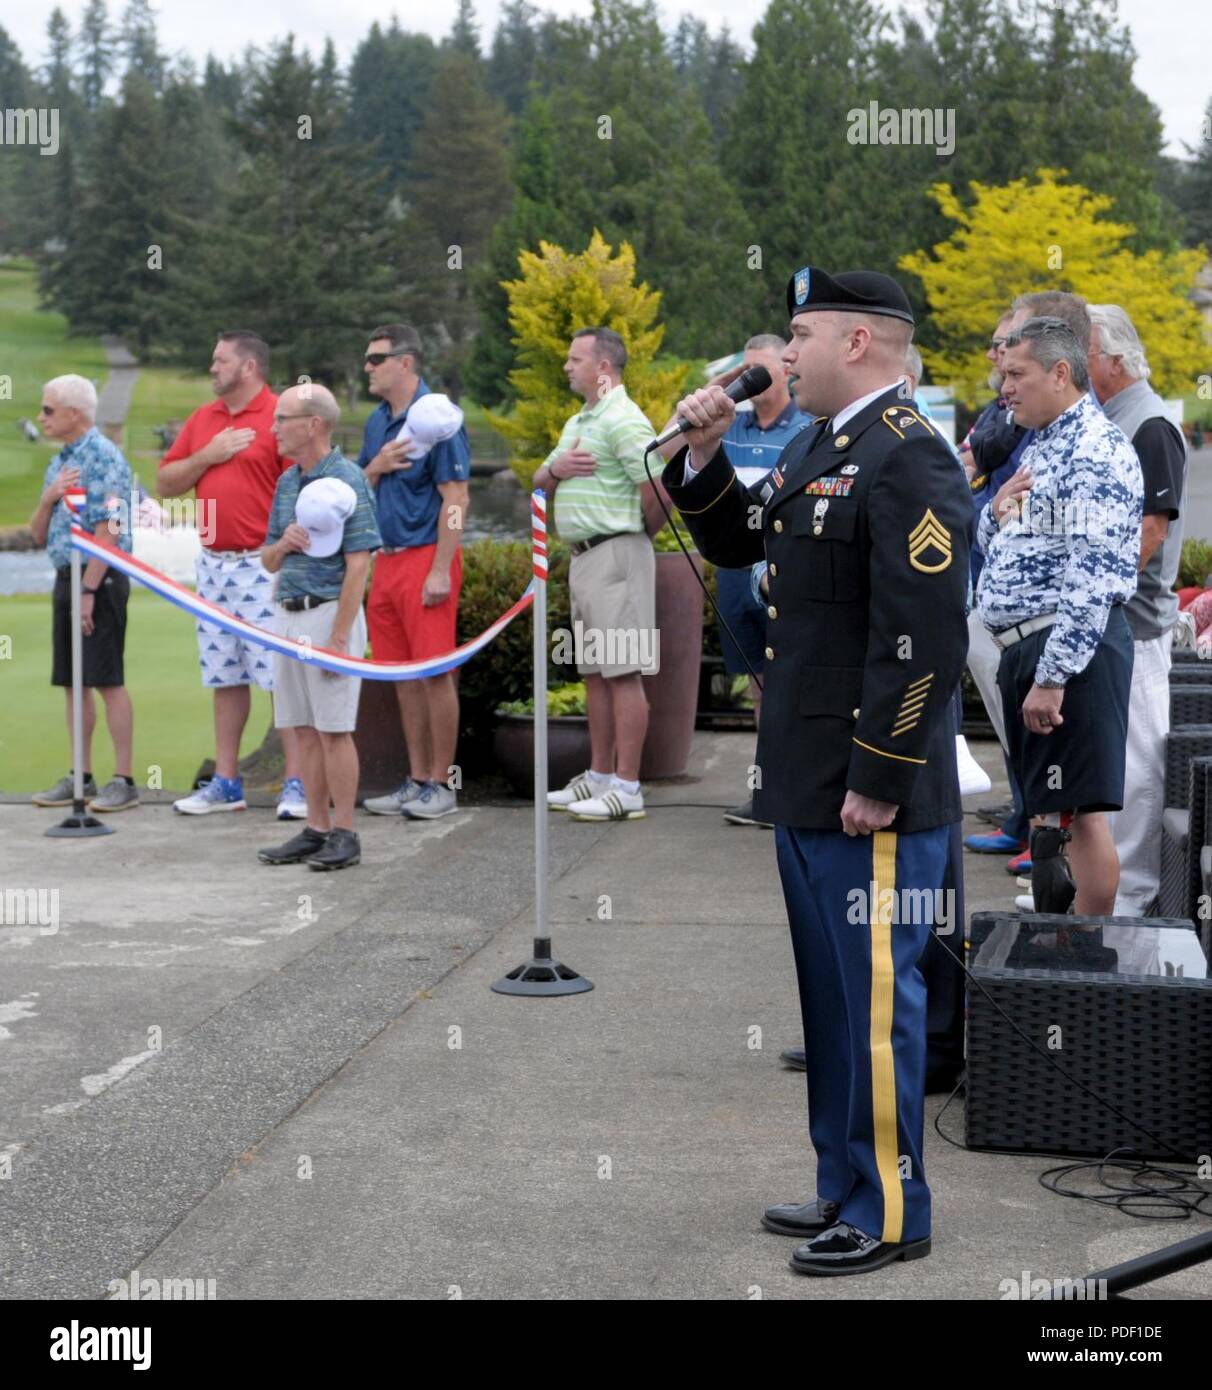 Ssg. James Hosat, from the I Corps Band on Joint Base Lewis-McChord, performs the National Anthem during the opening ceremonyof the Muckleshoot Casino Washington Open Pro-Am May 19 at the Meridian Valley Country Club in Kent, Washington. The event took place over Armed Forces Weekend. Stock Photo